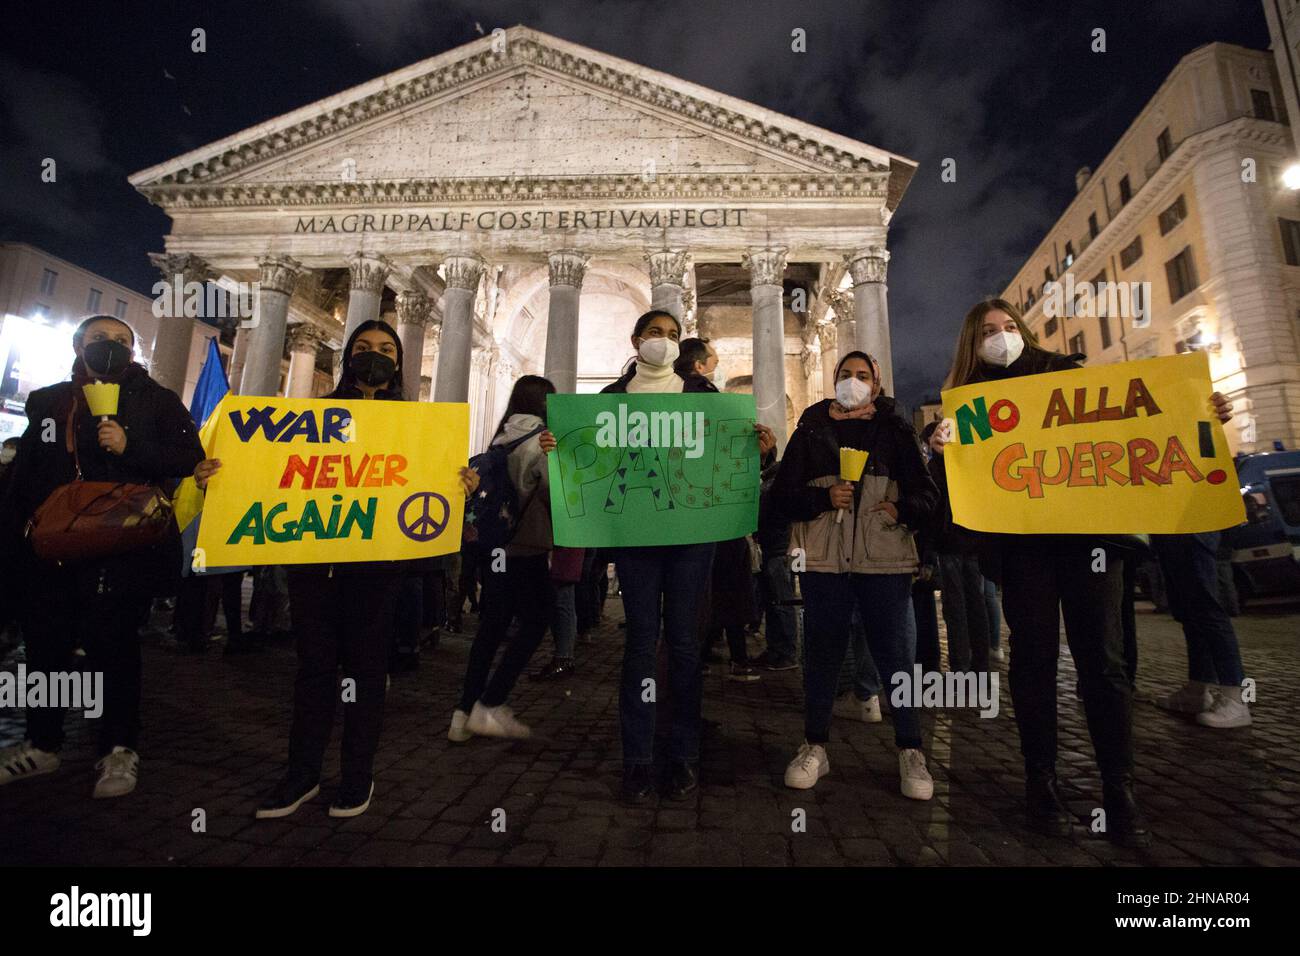 Rome, Italy. 15th Feb, 2022. Today, a No War candlelit vigil was held in Rome outside the Pantheon. The demonstration was organised by the Community of Sant’Egidio to call for peace between the Russian Federation and Ukraine. Stock Photo